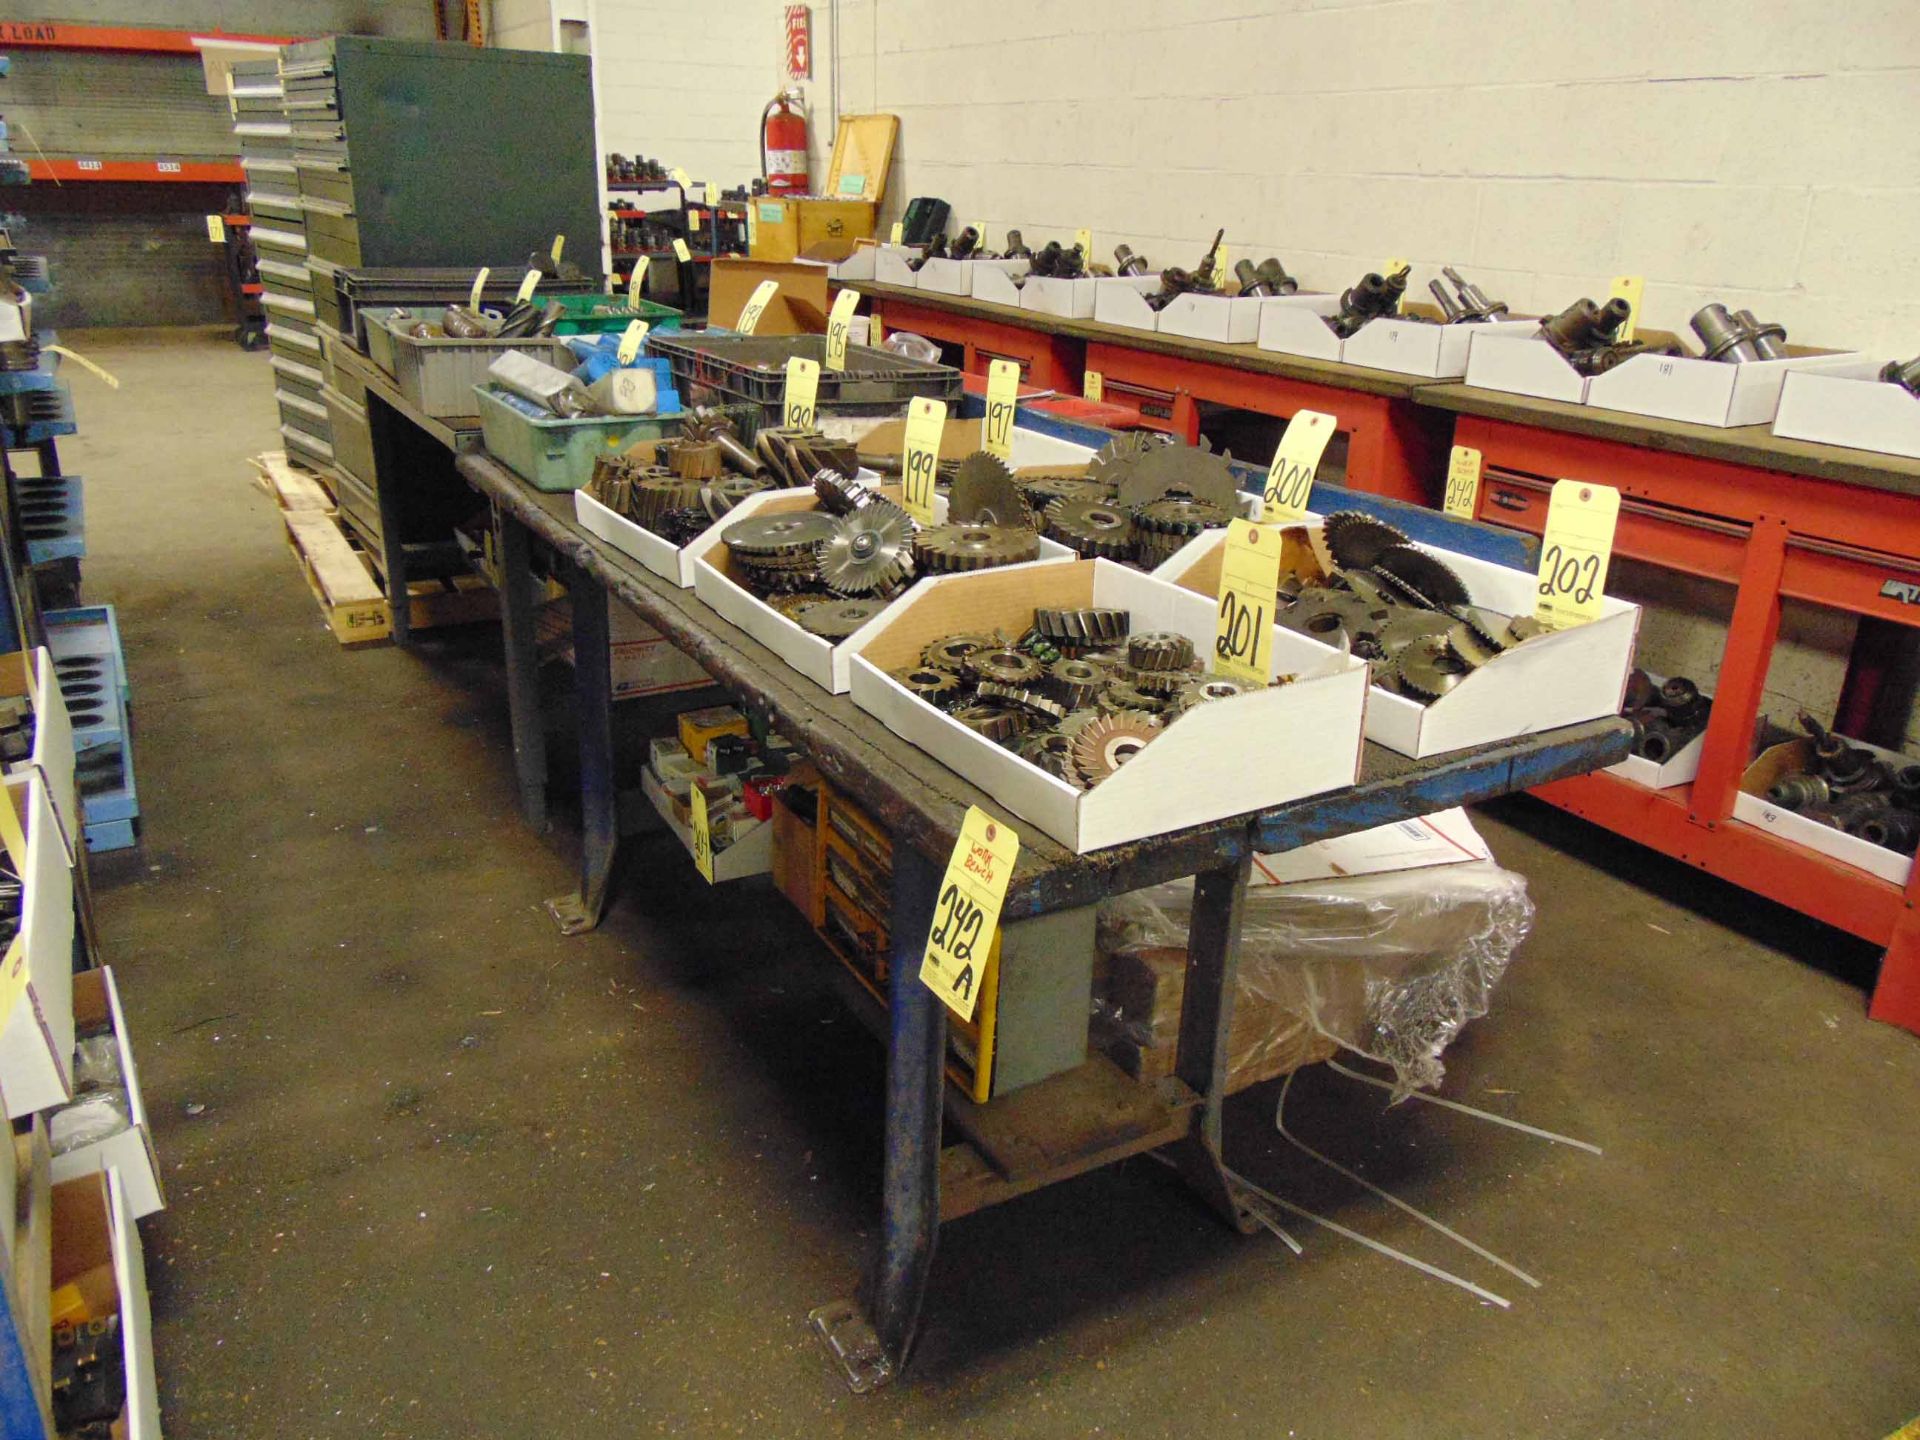 LOT OF WORKBENCHES (2) (cannot be removed until contents have been taken)